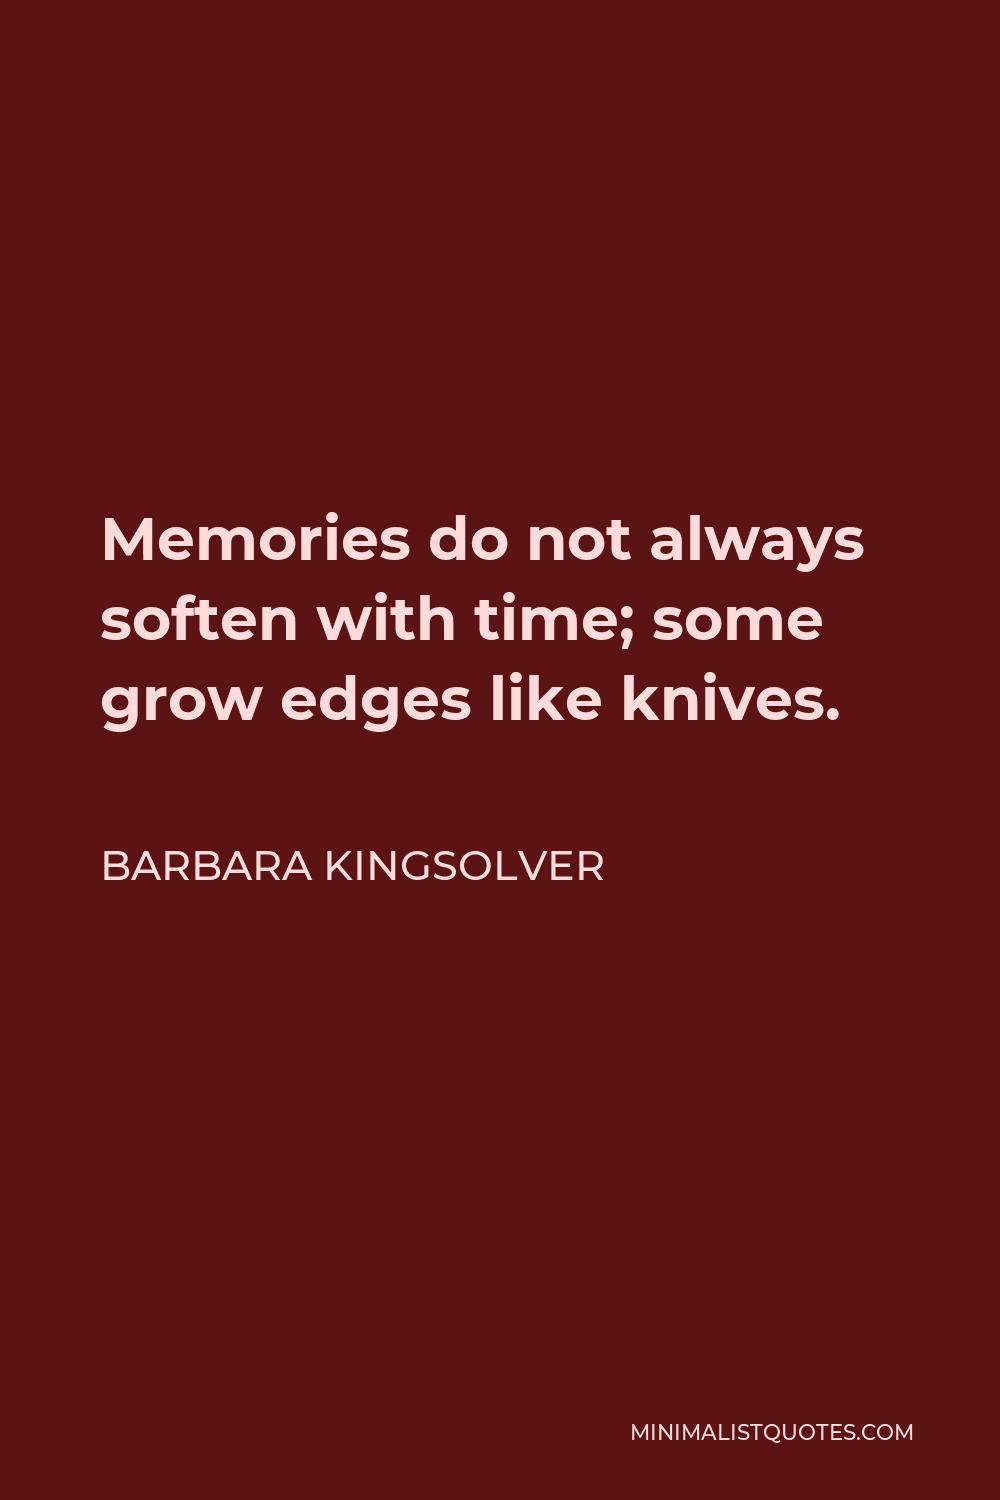 Barbara Kingsolver Quote - Memories do not always soften with time; some grow edges like knives.